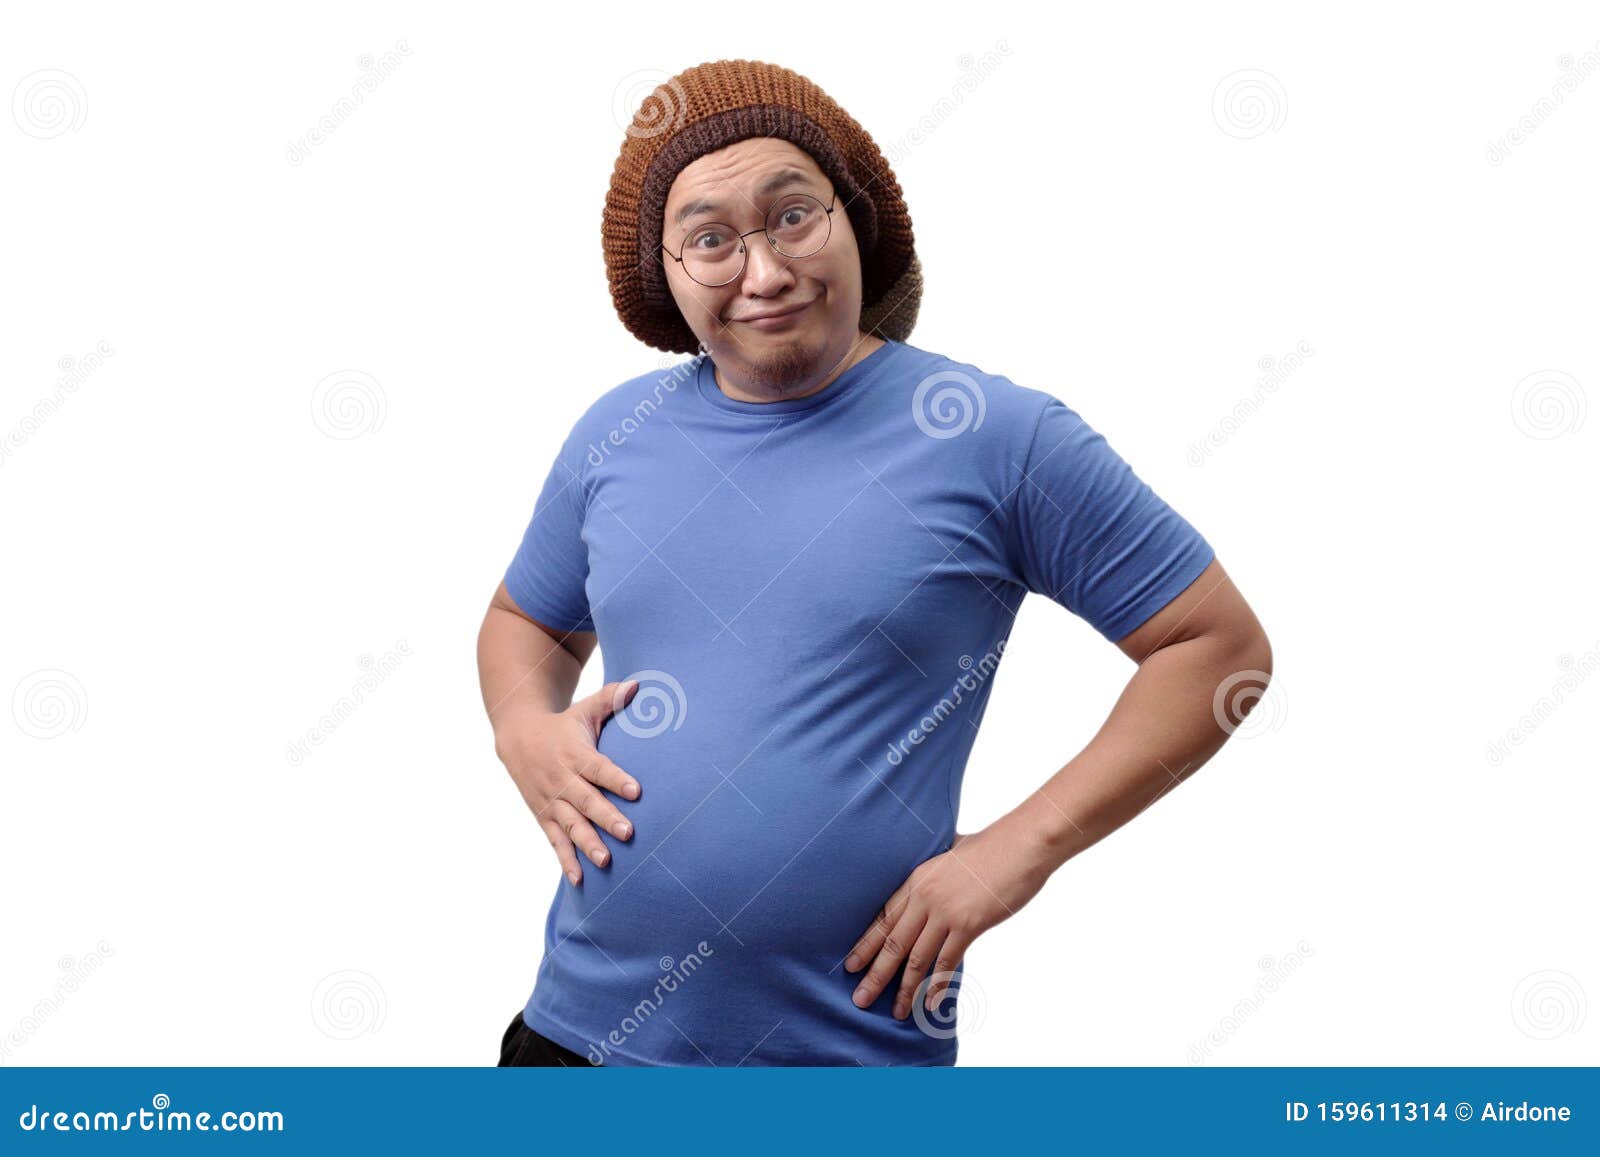 Funny Fat Asian Man stock photo. Image of asian, obese - 159611314